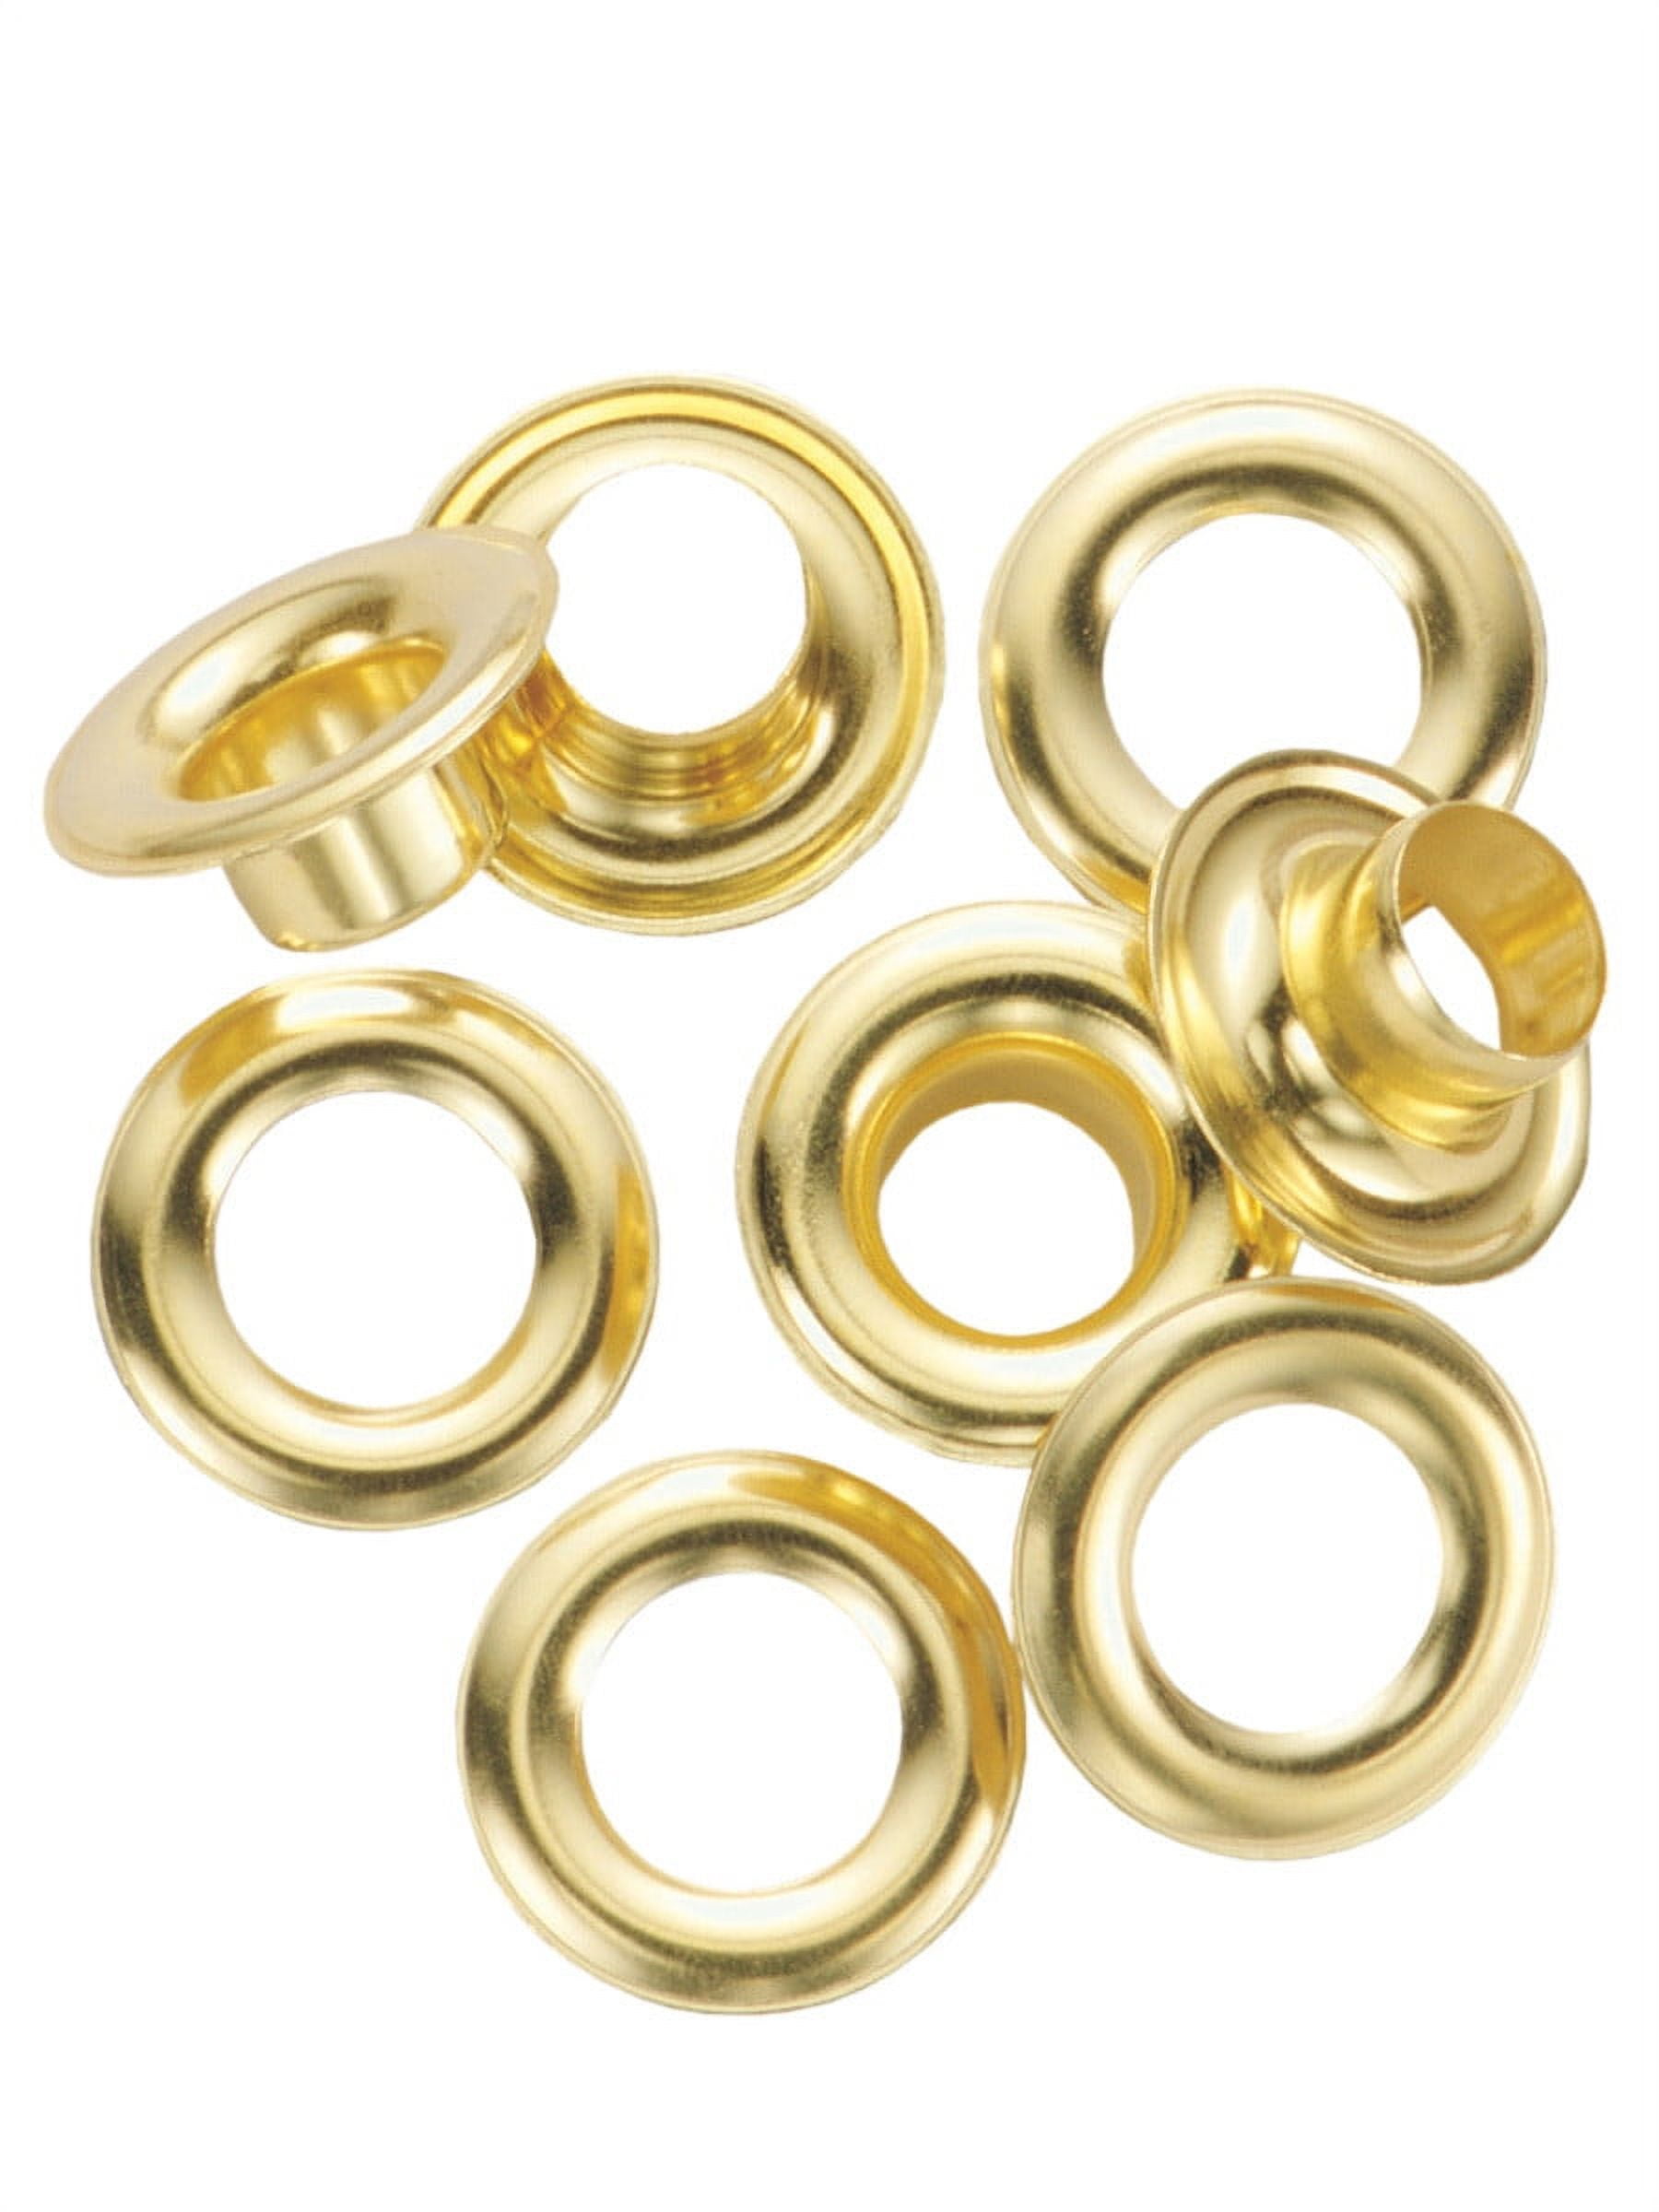 General Solid Brass Grommet Refill, 1/2 - 24 pack